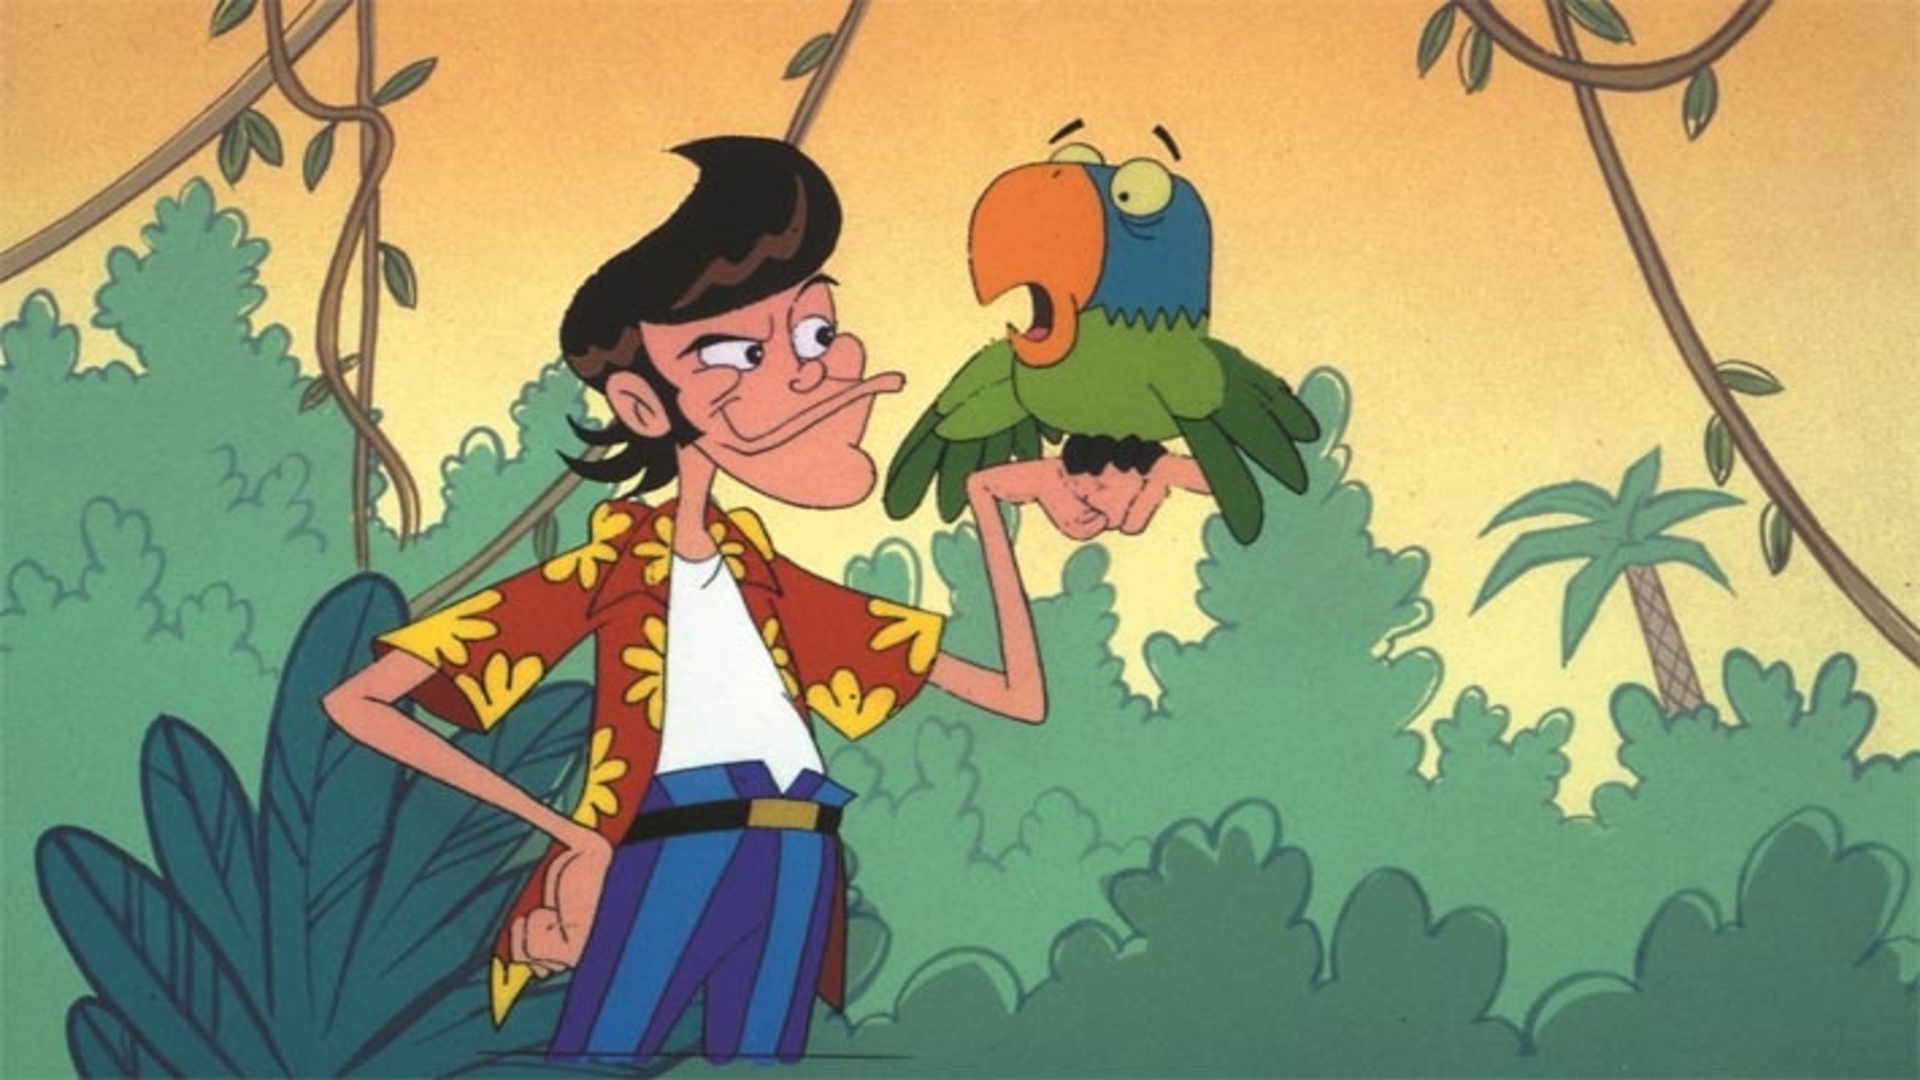 ace ventura pet detective the animated series